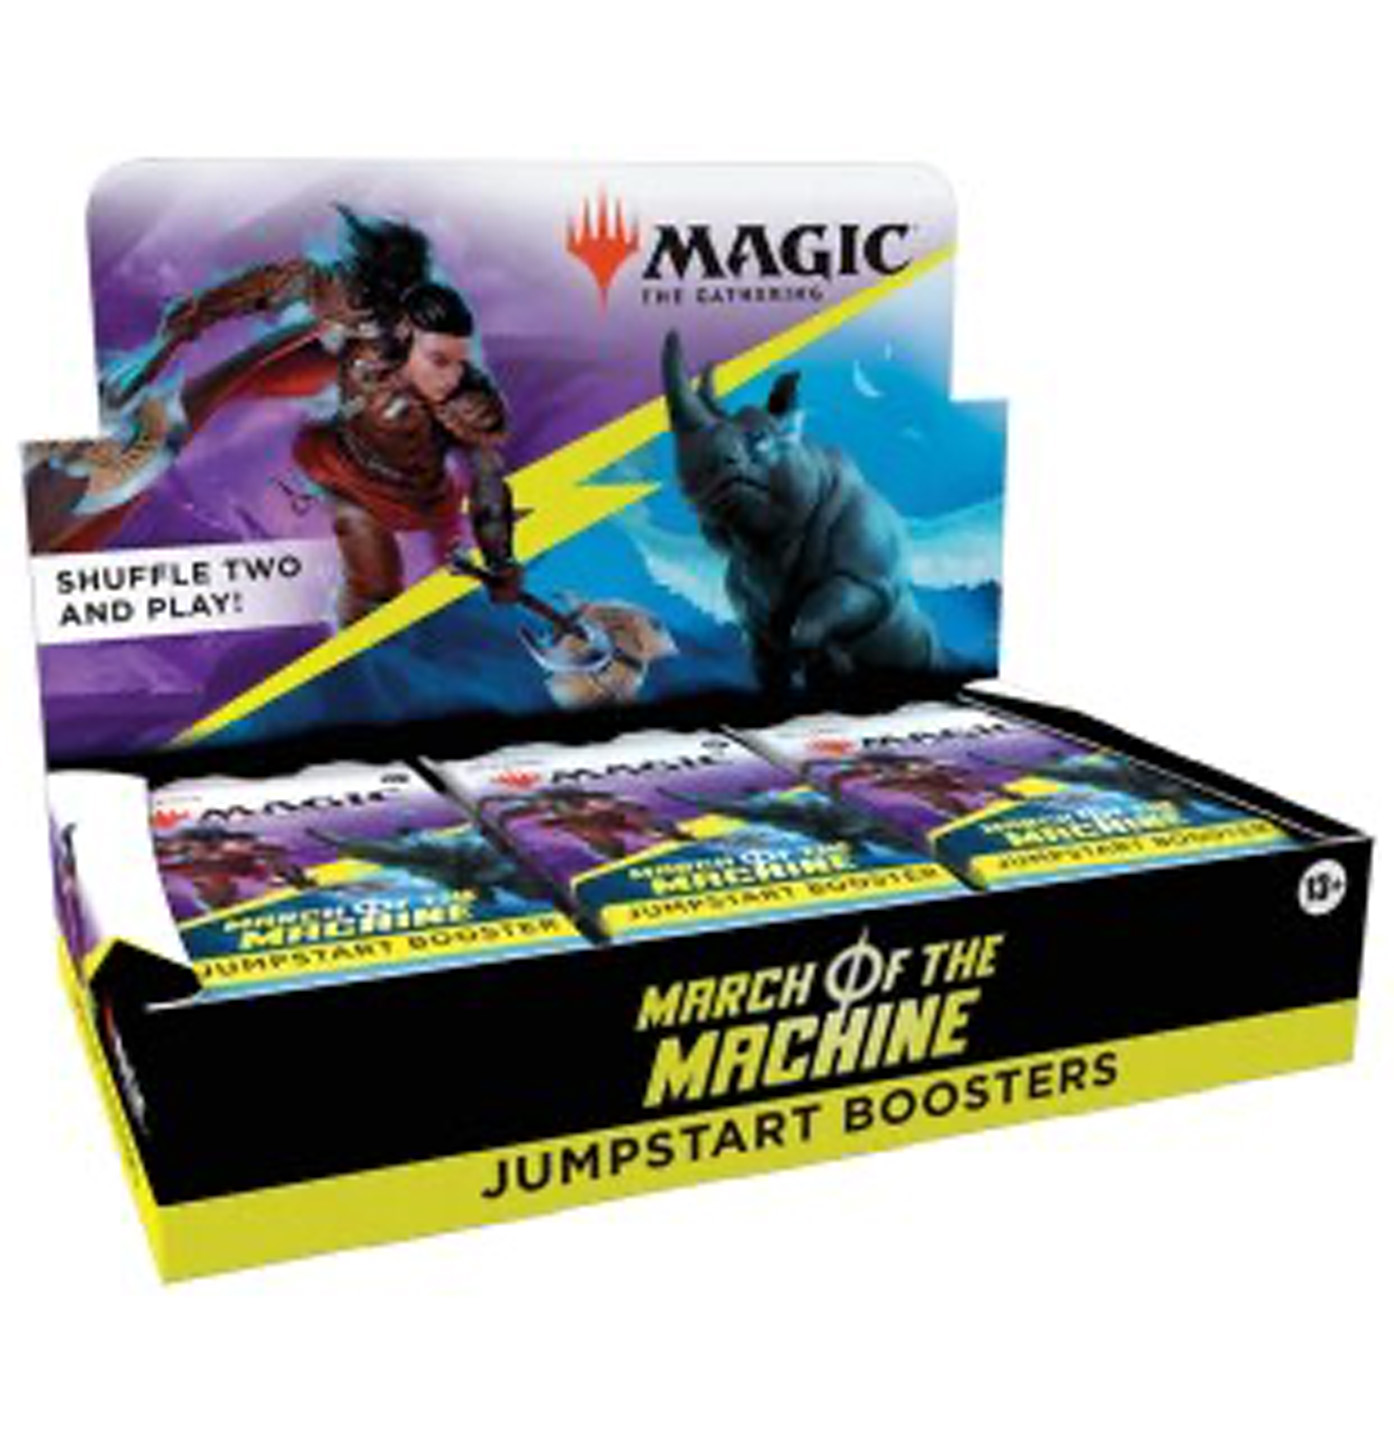 March of the Machine Jumpstart Booster Display - Magic the Gathering - EN